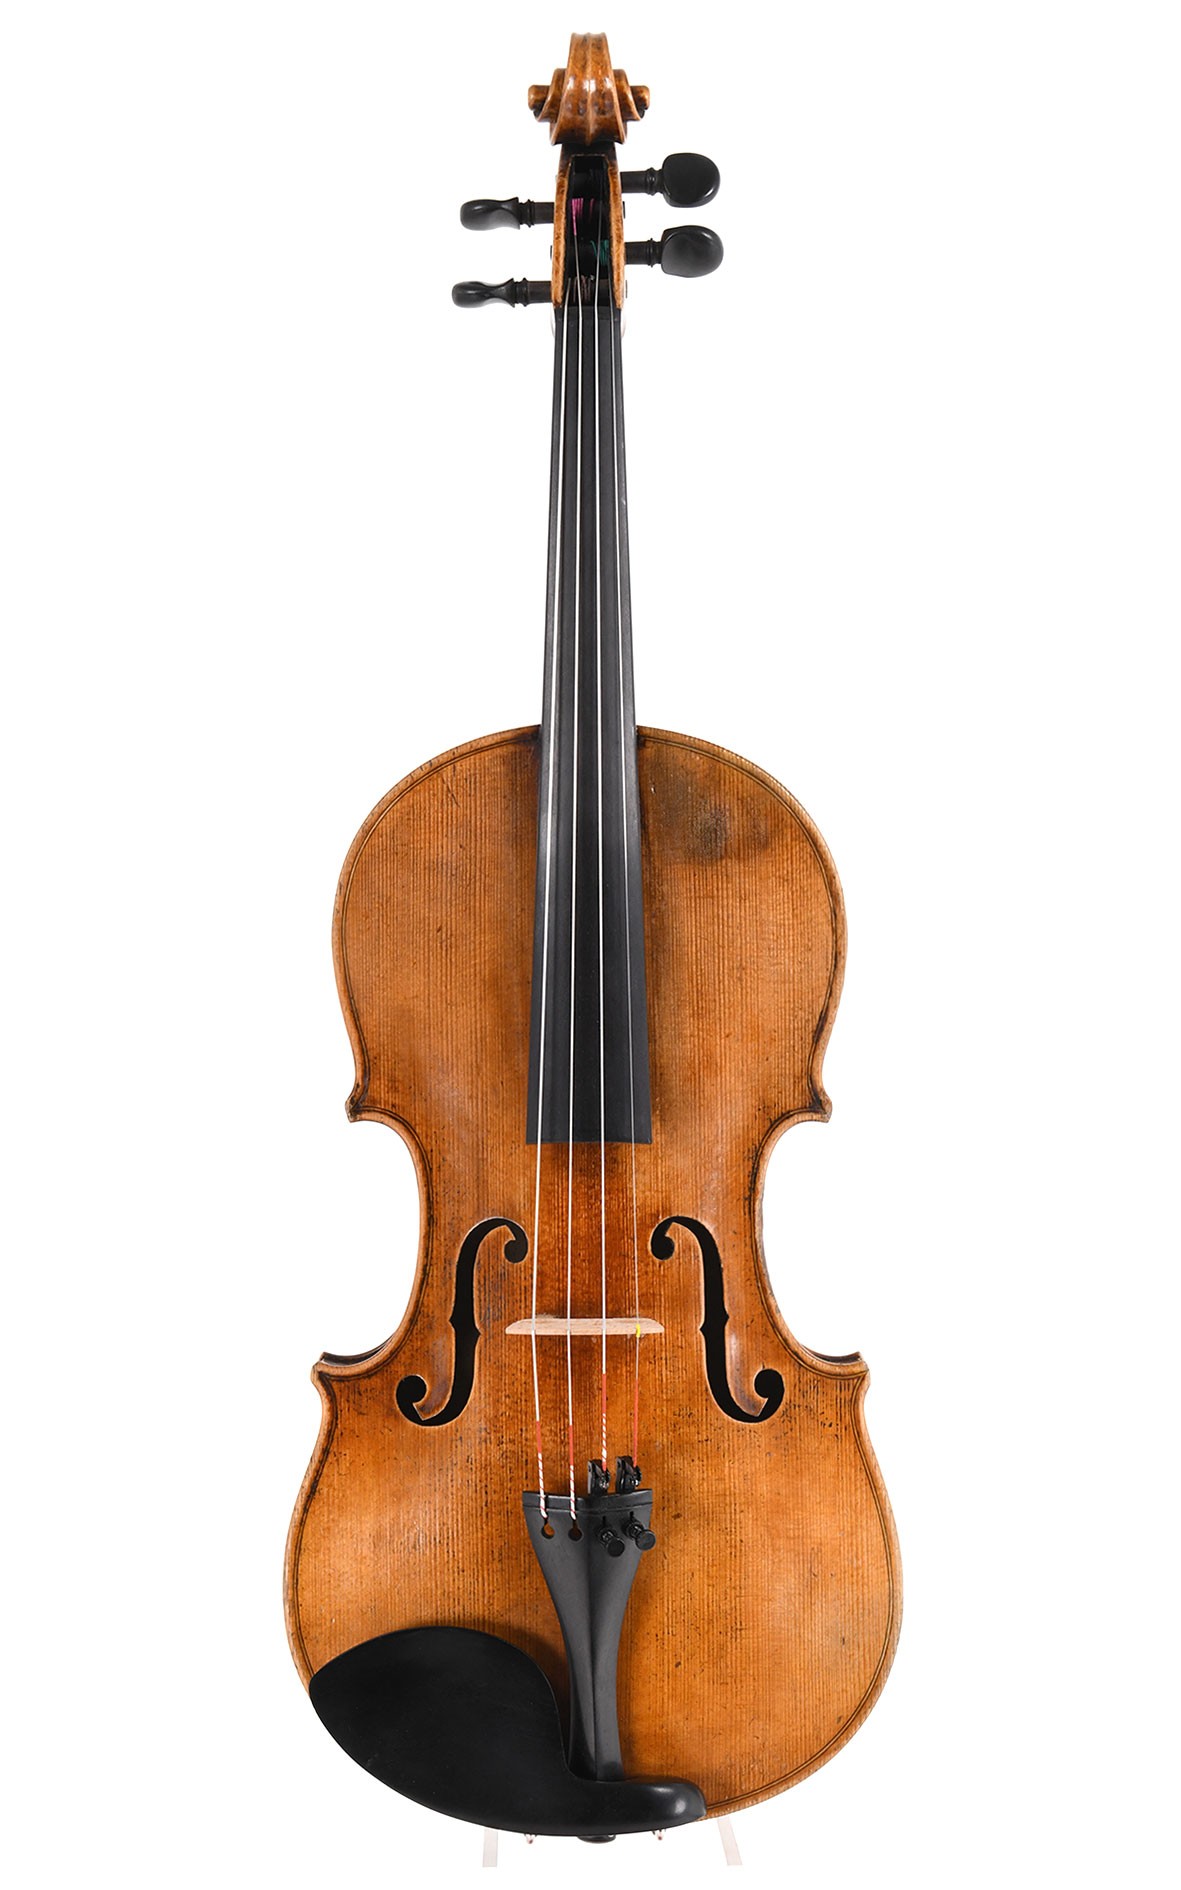 Old Violin from Saxony, c.1900, after J. B. Schweitzer